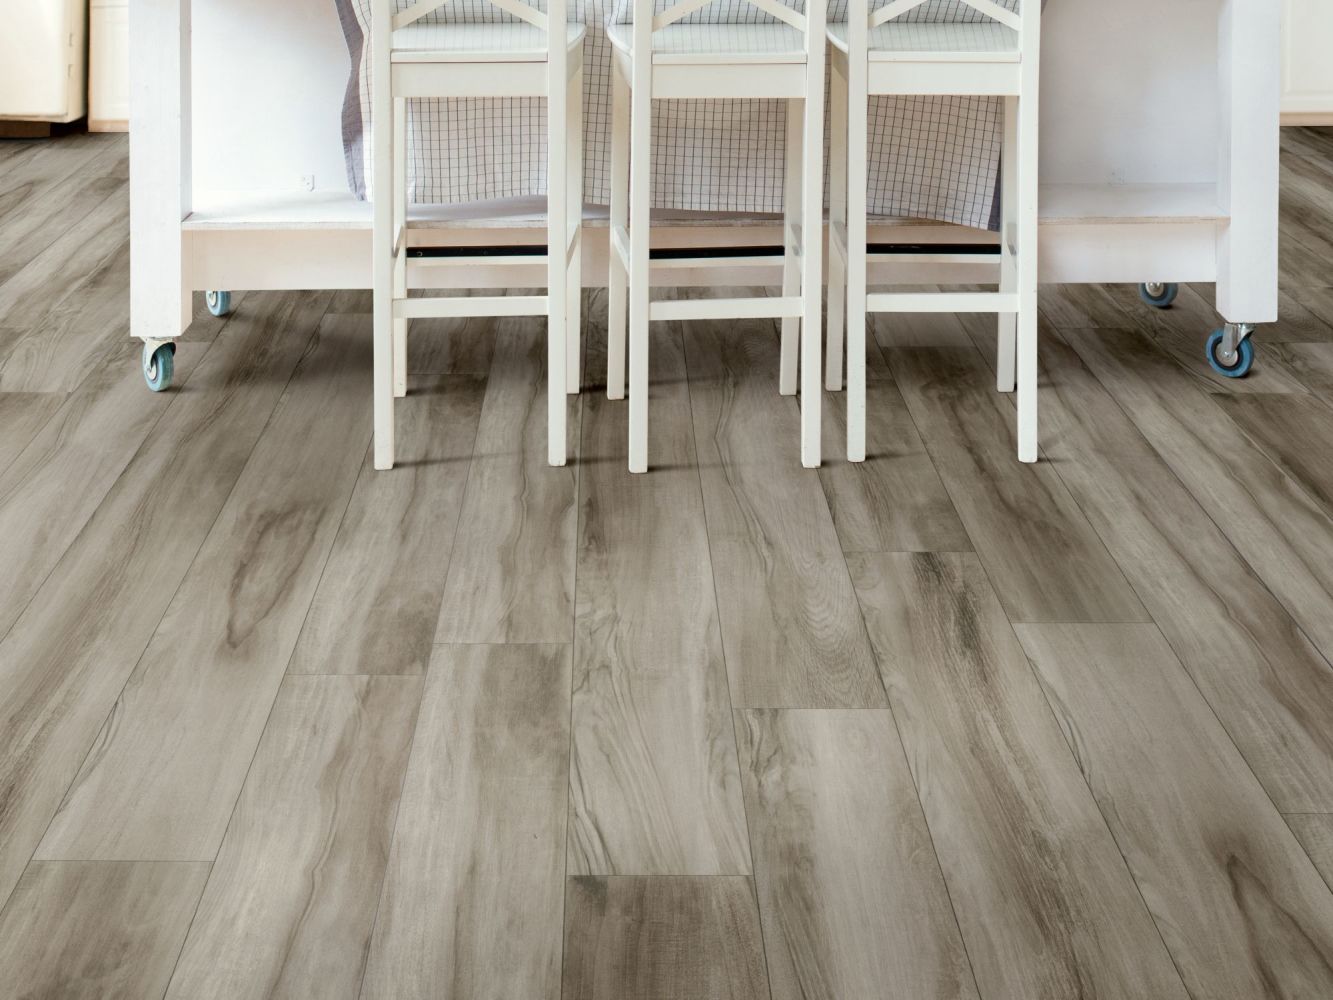 Shaw Floors Resilient Residential Urban Woodlands 65g Noble 00583_VG088